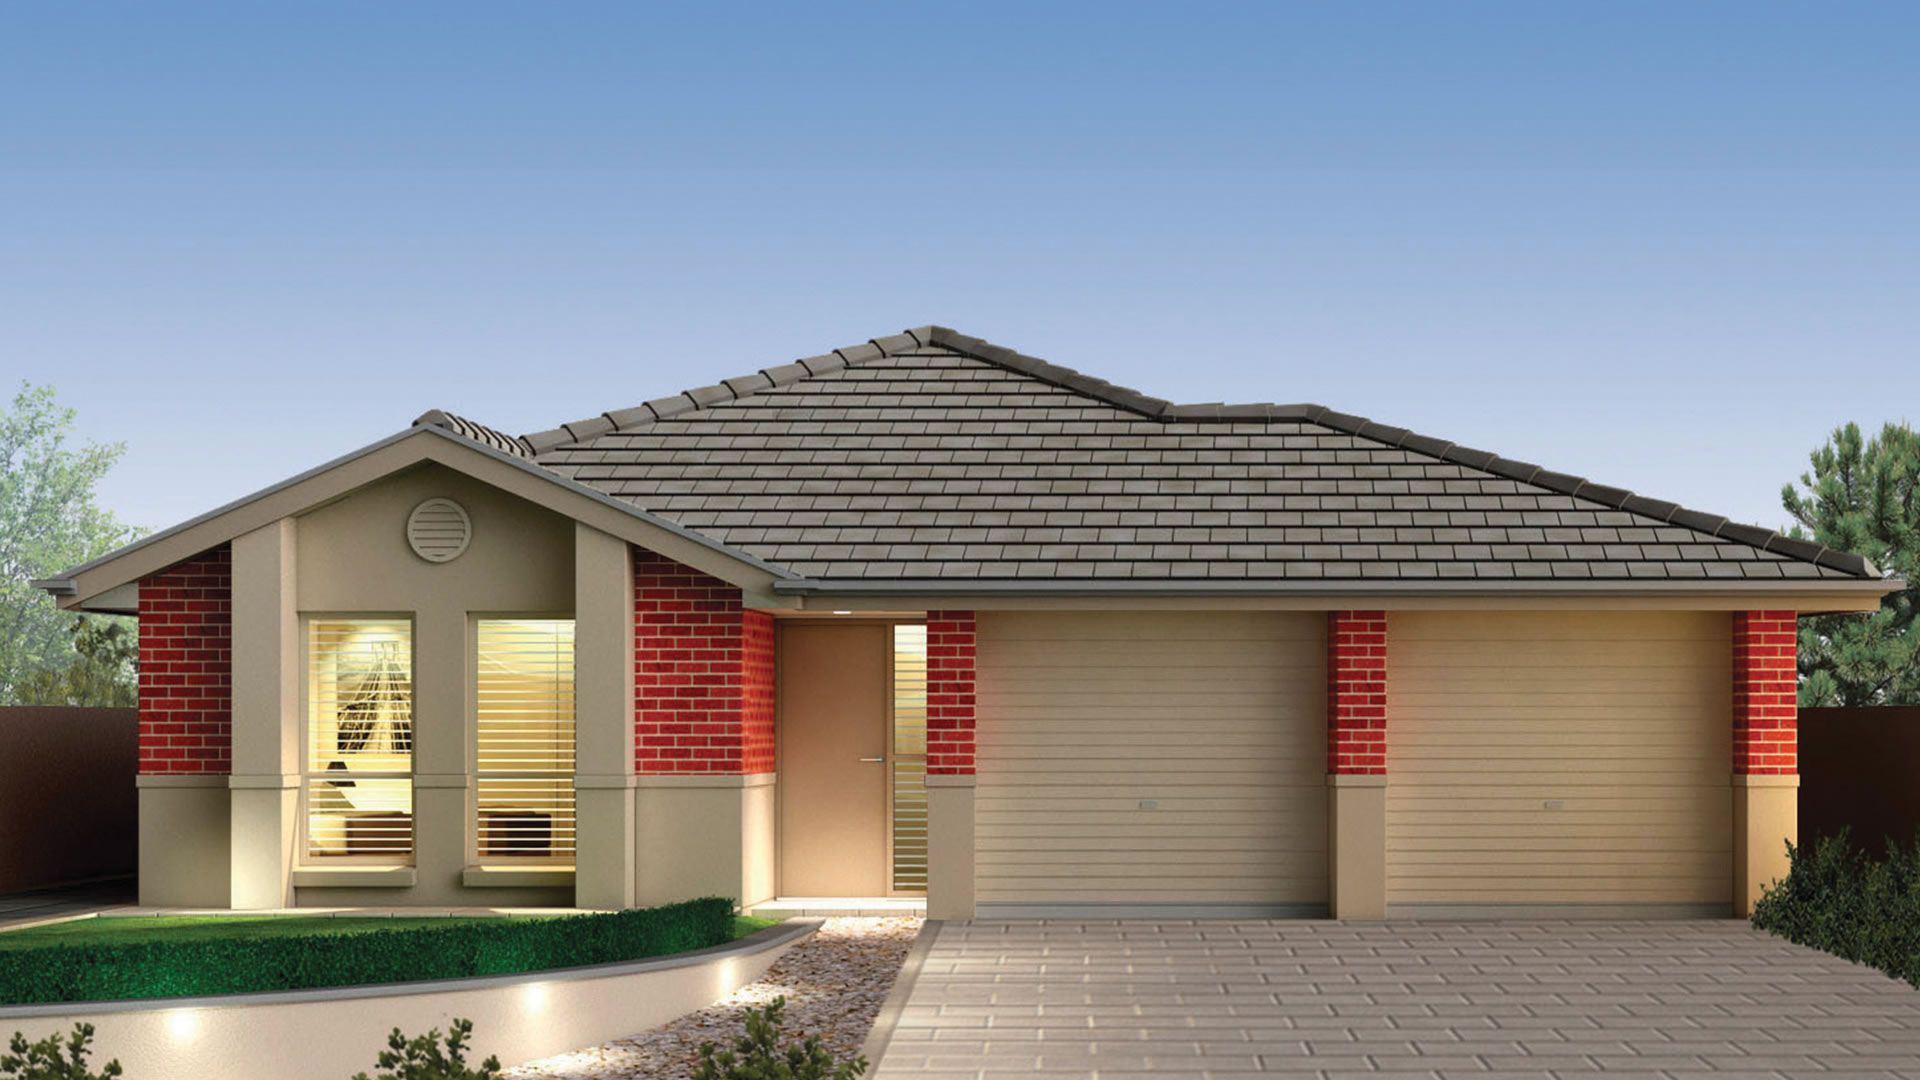 3 bedrooms New House & Land in Lot 492 Hartley Walk GAWLER EAST SA, 5118